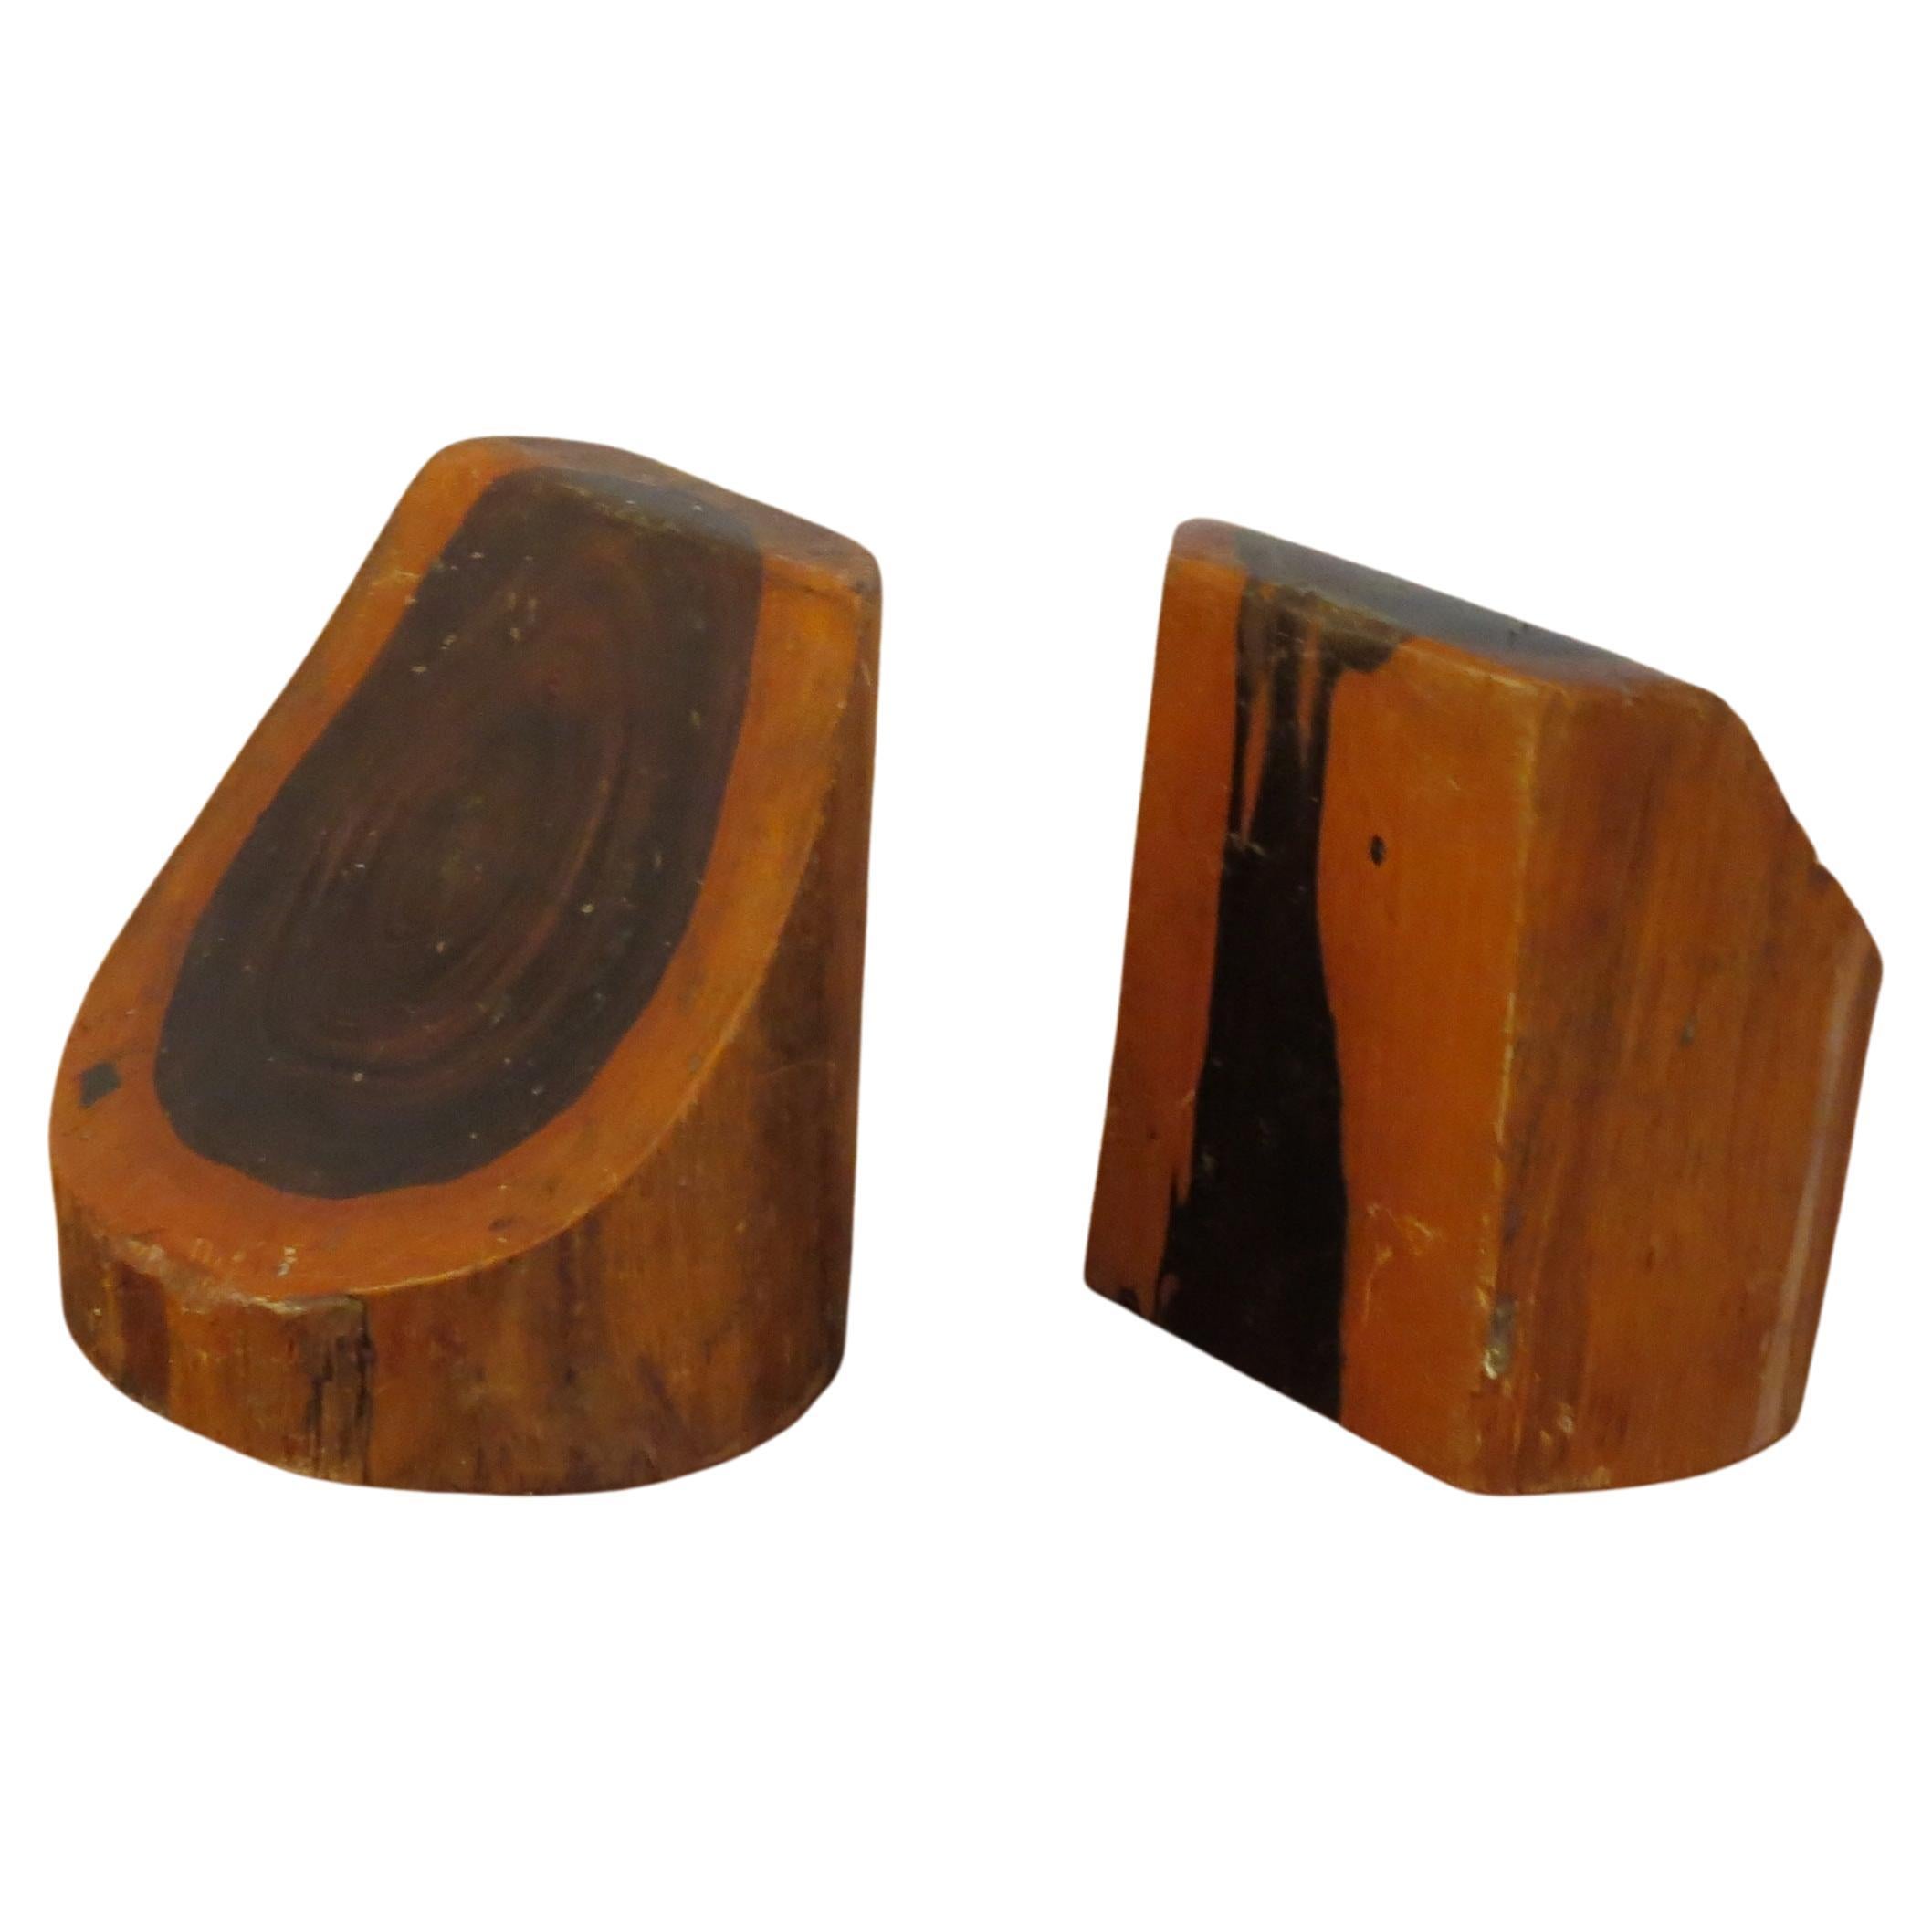 Pair of 1960s Hand crafted Sculptural Book Ends in Laburnum Wood